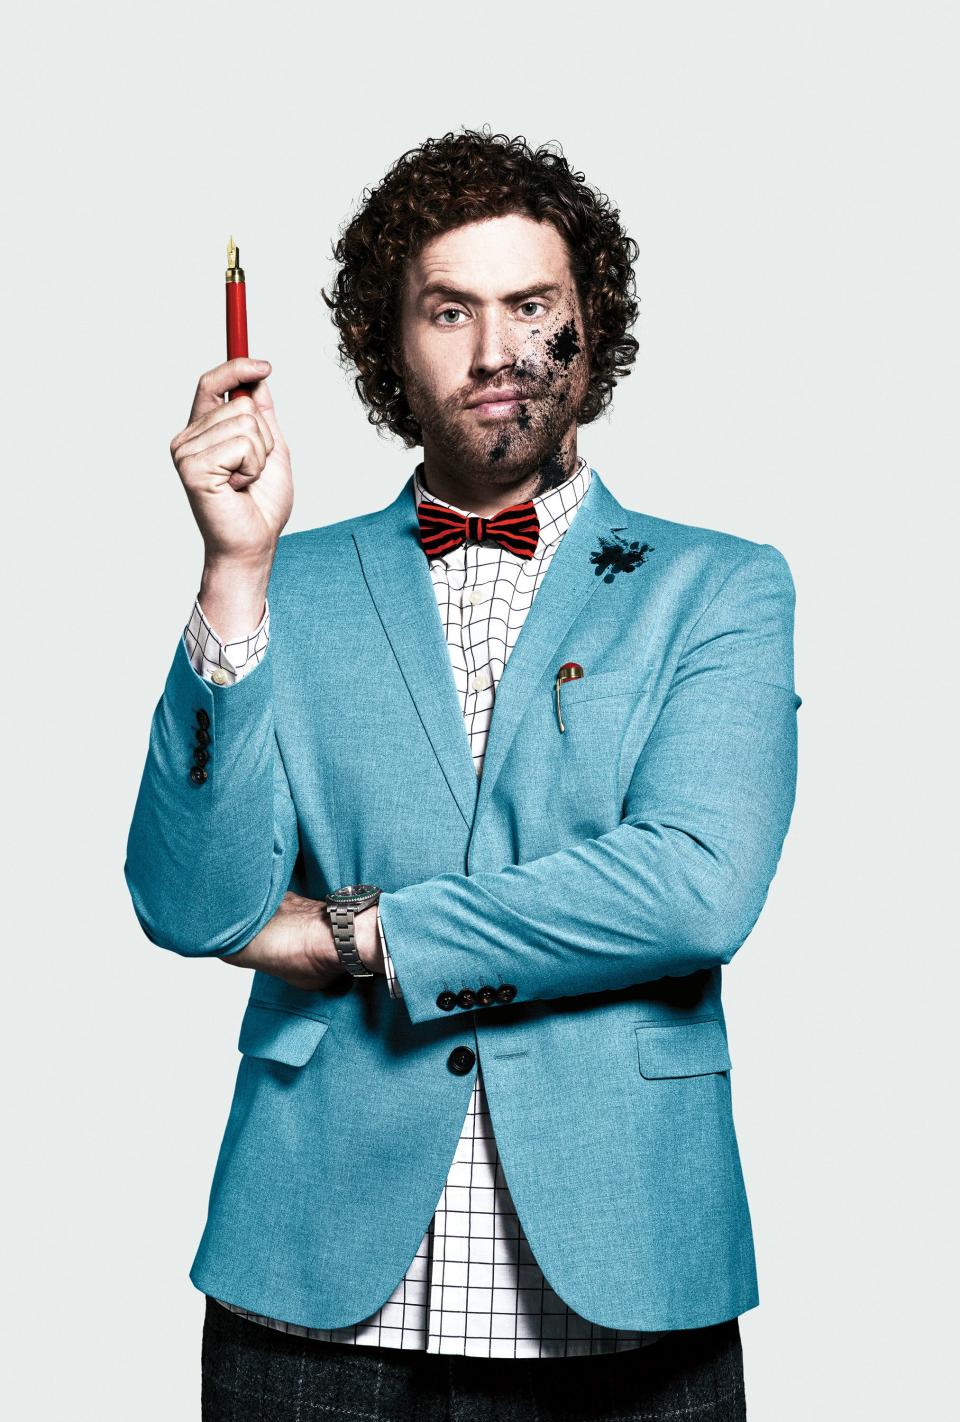 Comedian and actor T.J. Miller performs at the Funny Bone in West Des Moines.